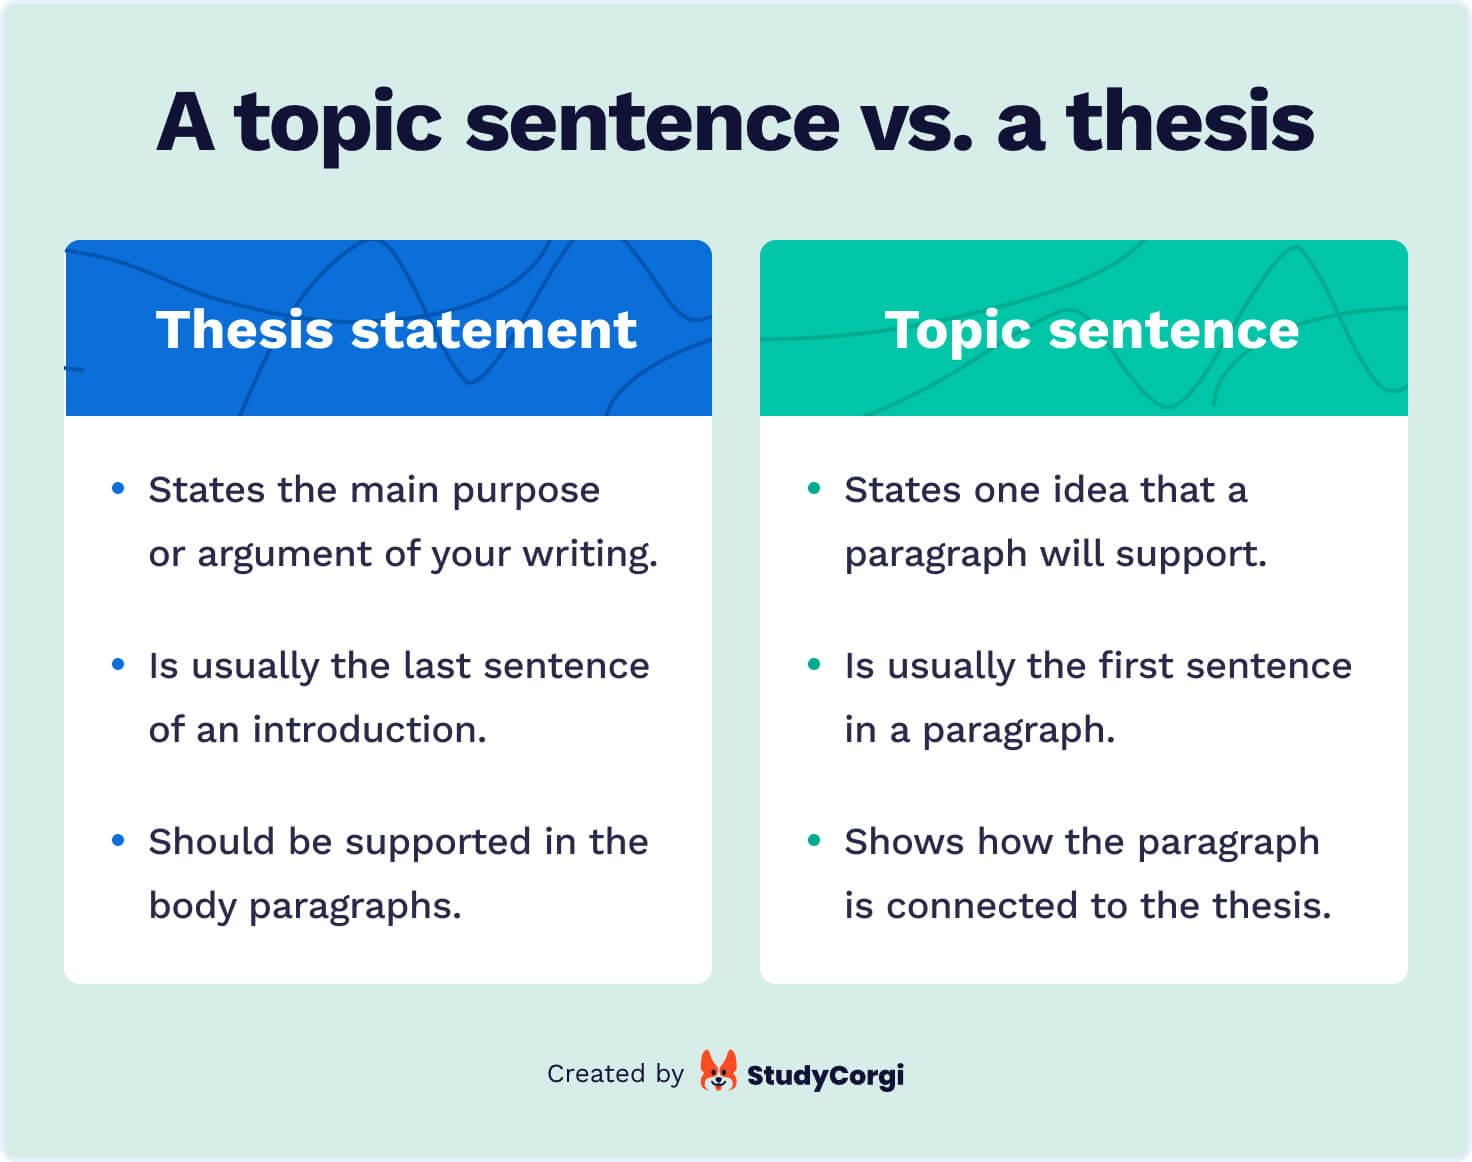 is the topic sentence your thesis